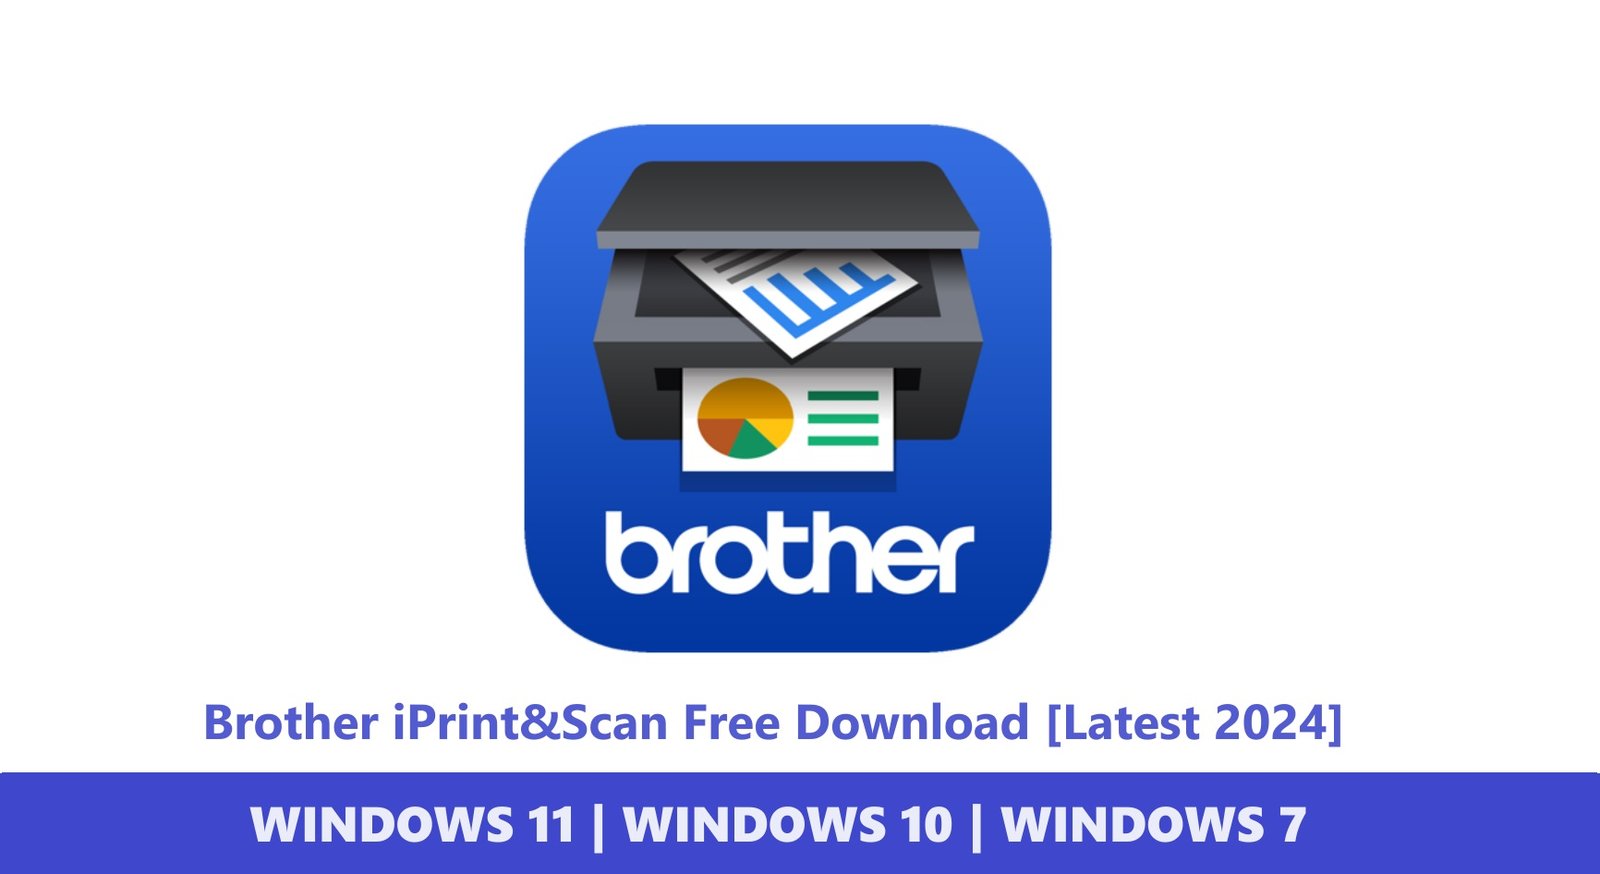 Brother iPrint&Scan Windows 11